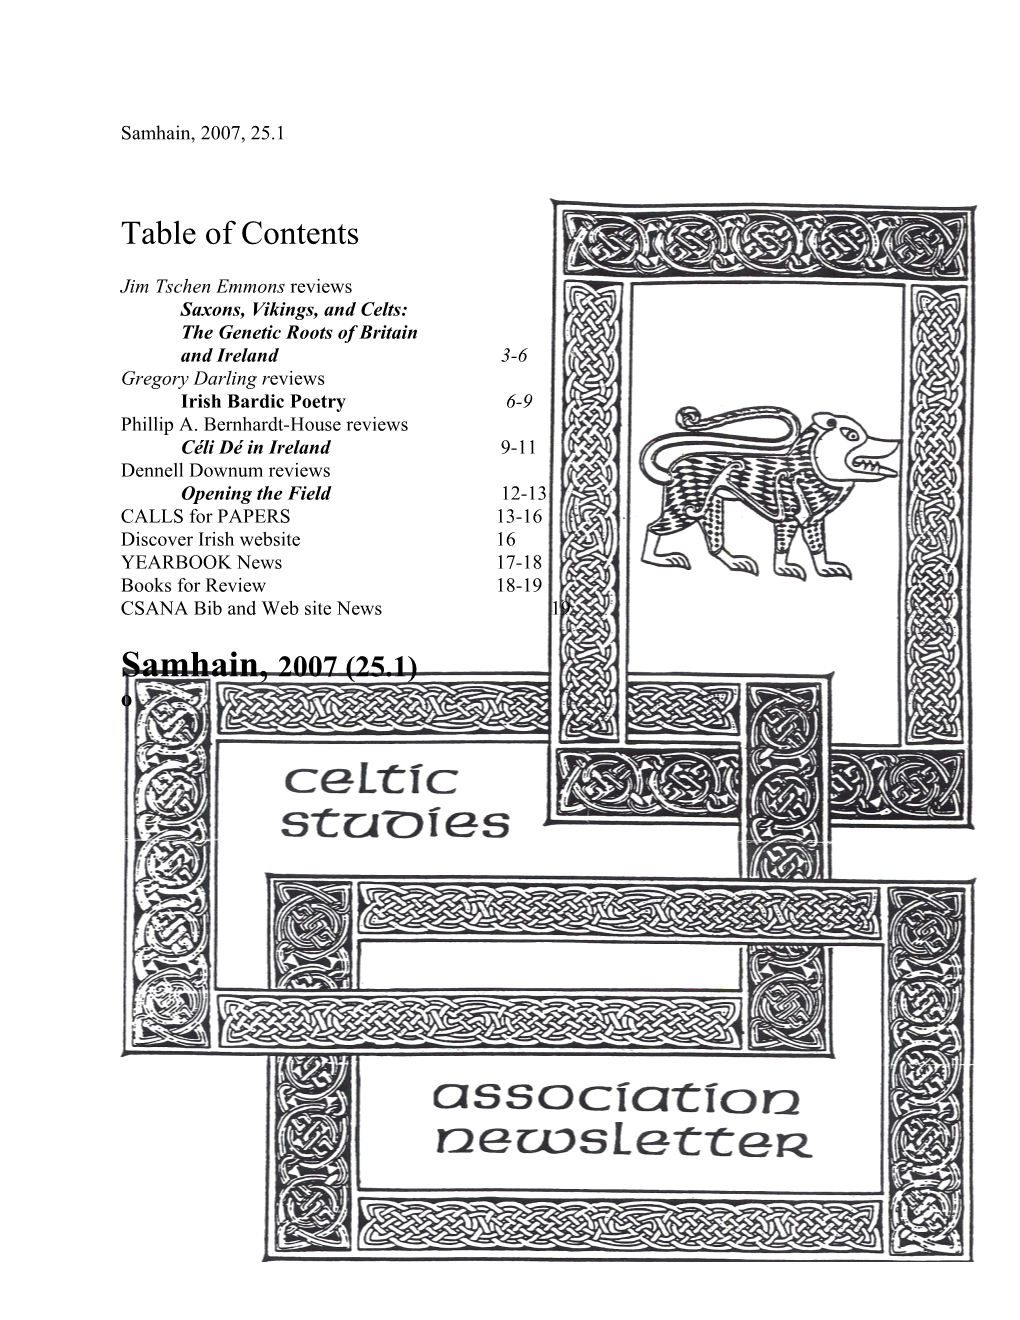 Table of Contents s50